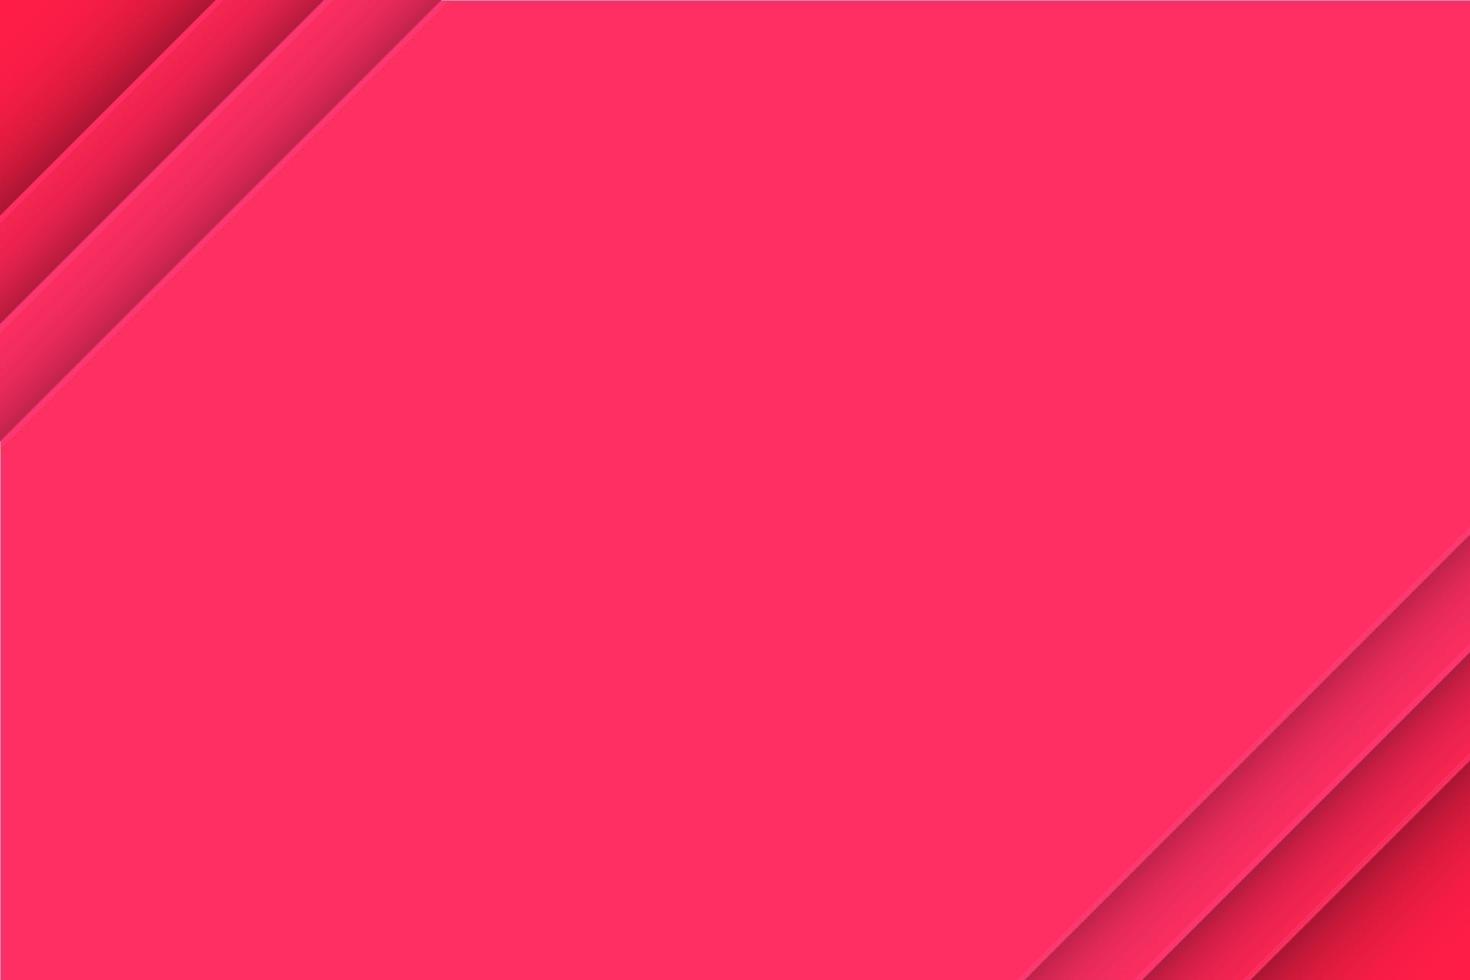 Realistic Pink gradient abstract background. Backdrop with copy space for presentation, web design, banner or advertising Minimal modern trendy cute style graphic. Free Vector Design